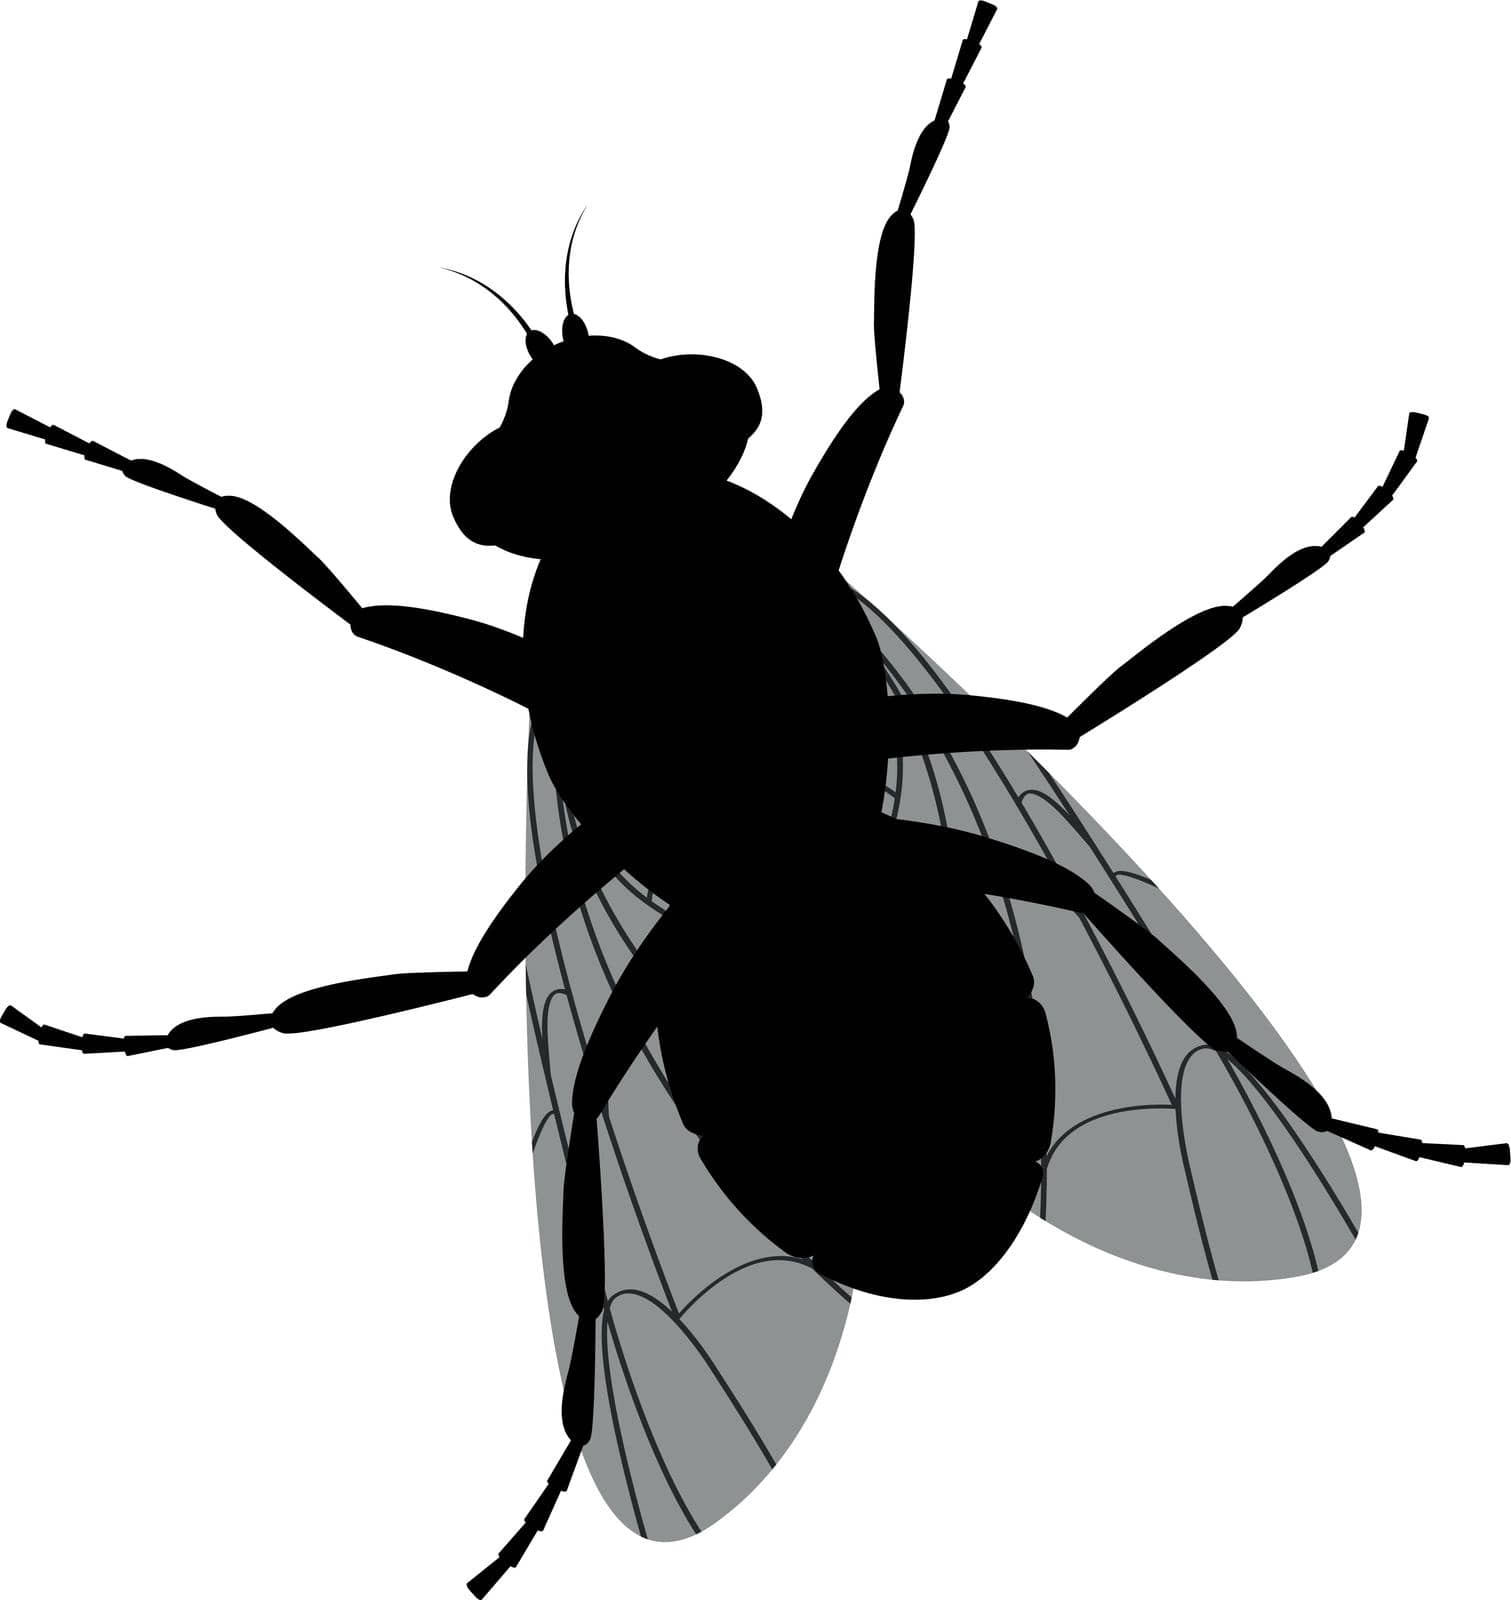 The silhouette of a fly. Fly top view. A flying insect. Vector illustration isolated on a white background.